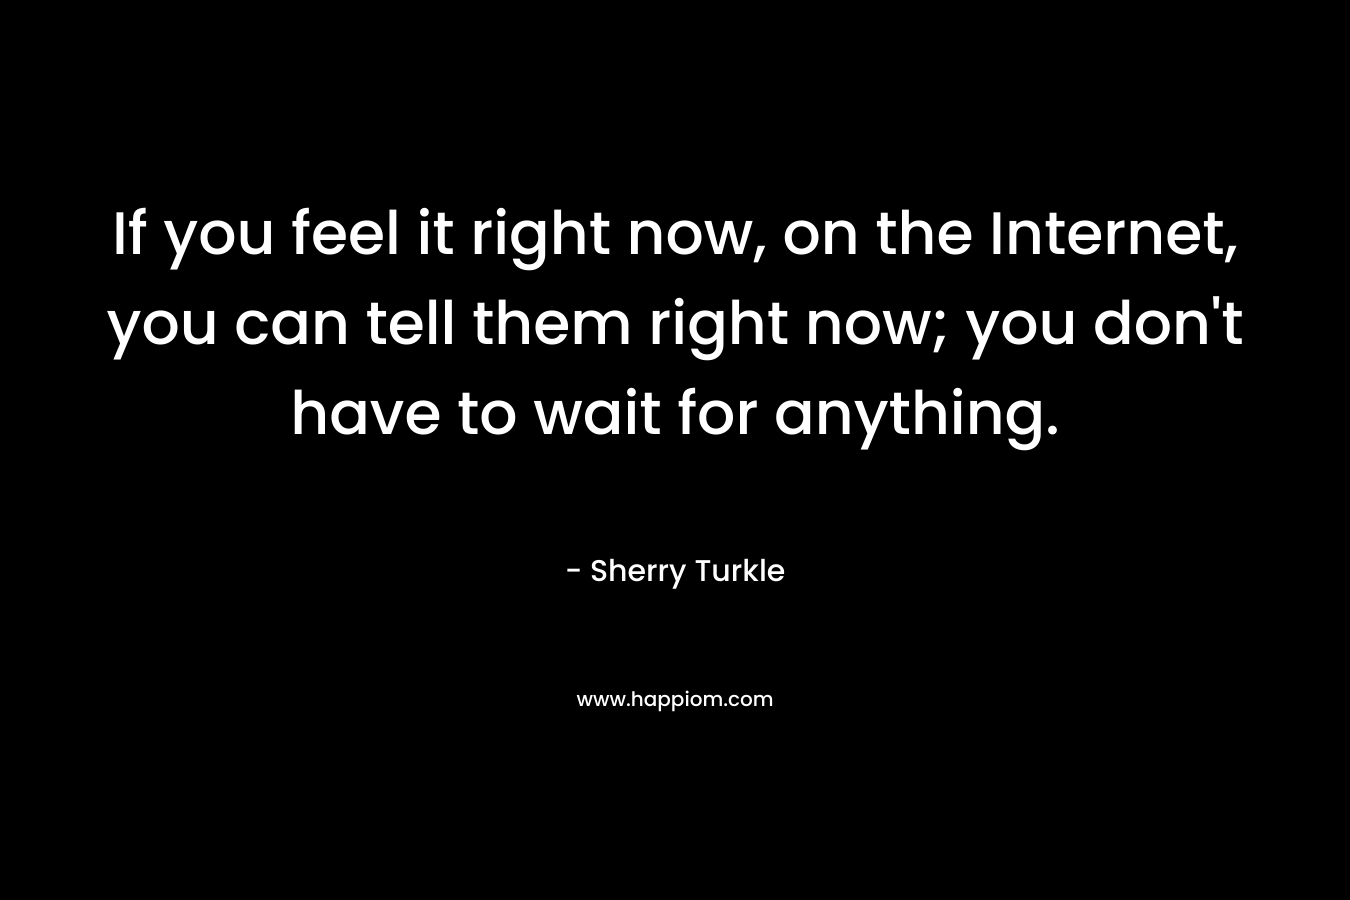 If you feel it right now, on the Internet, you can tell them right now; you don’t have to wait for anything. – Sherry Turkle